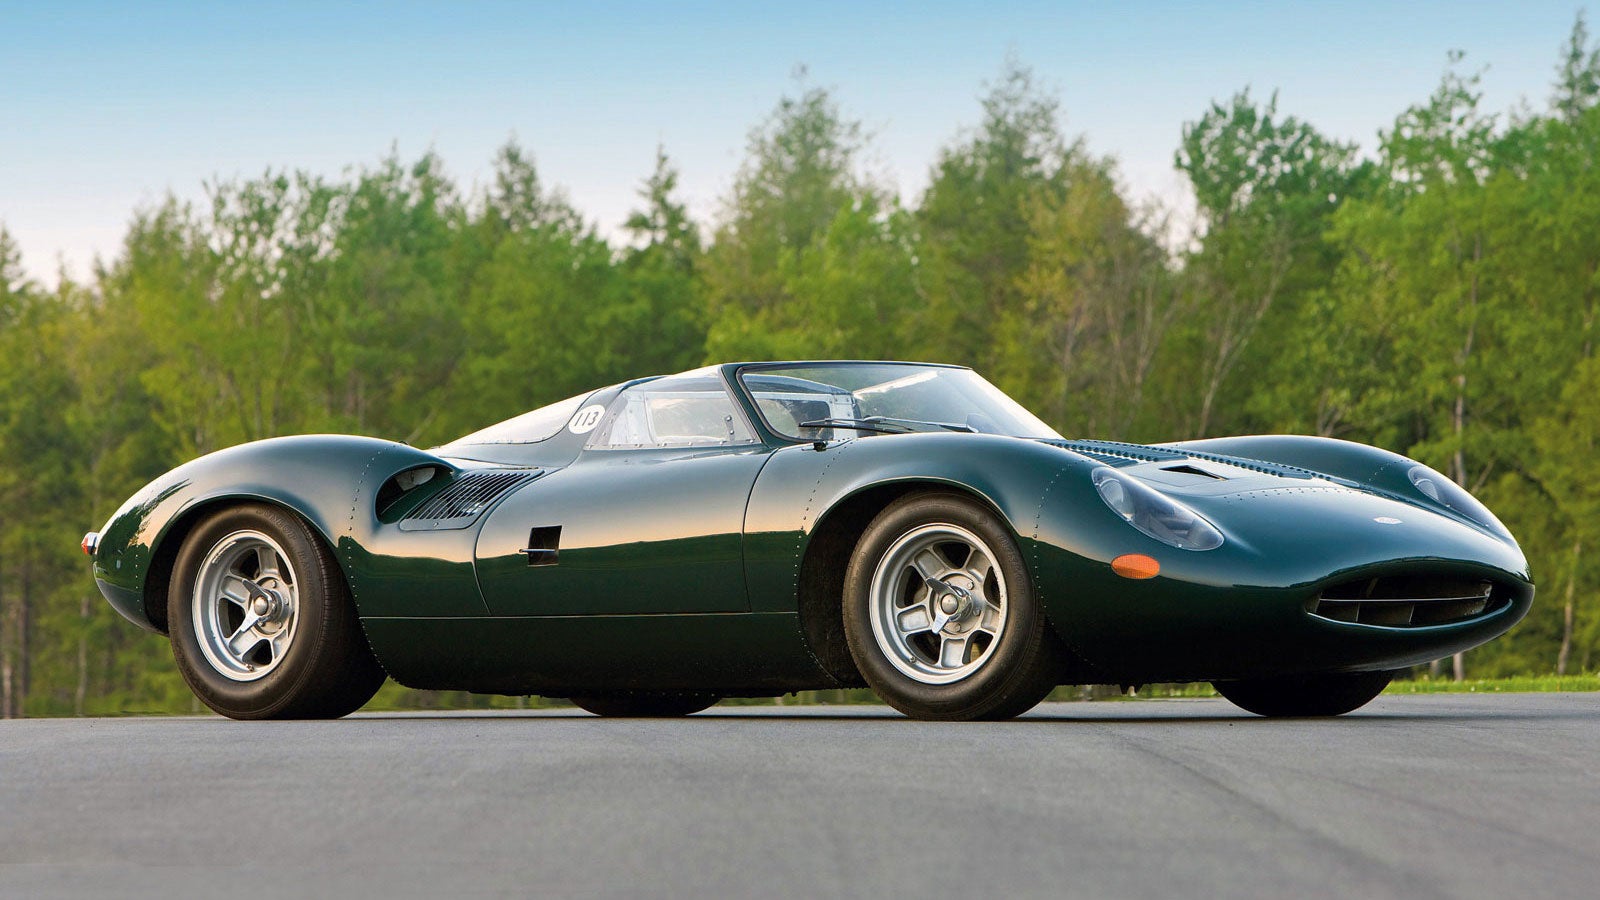 These Are the Best-Looking Cars Ever Made, According to You